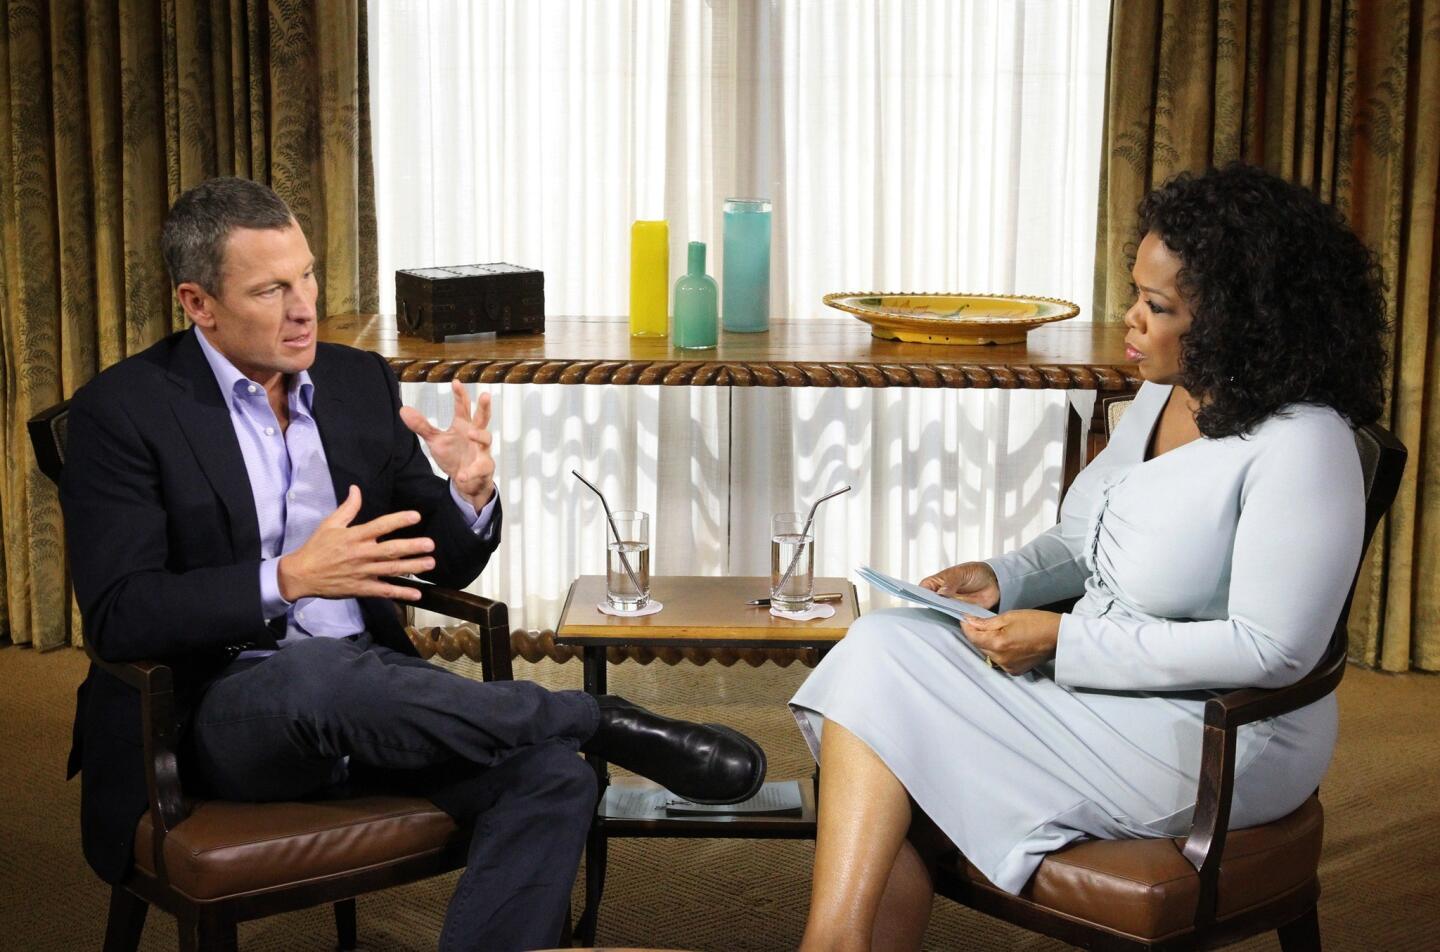 Lance Armstrong's two-night Oprah Winfrey interview media extravaganza may be grabbing attention this week, but despite the heightened media awareness, this is far from the first time a celebrity has gone on TV to make a confession or come clean. Here's a quick look back over how similar events have played out.